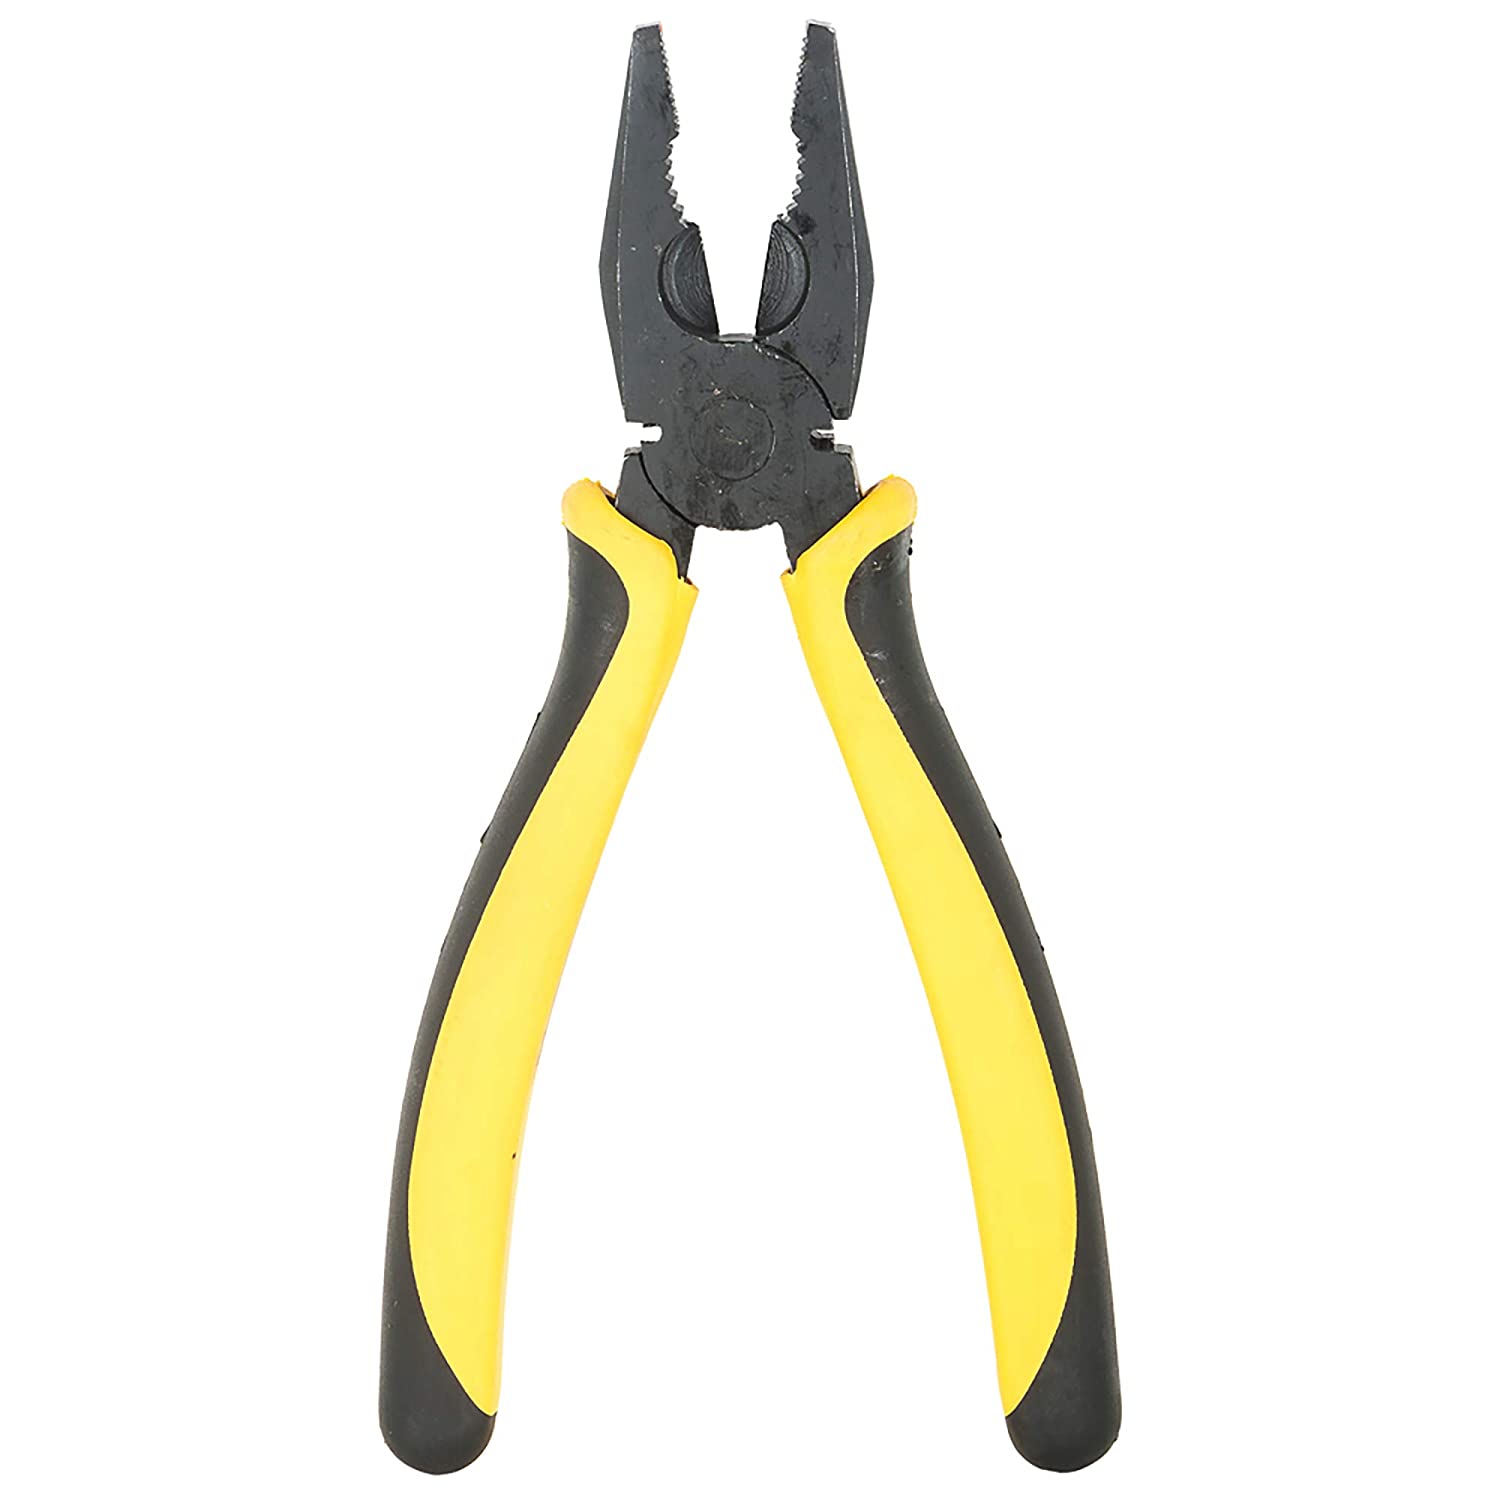 STANLEY 70-482 8'' Sturdy Steel Combination Plier Double Color Sleeve (Yellow and Black)